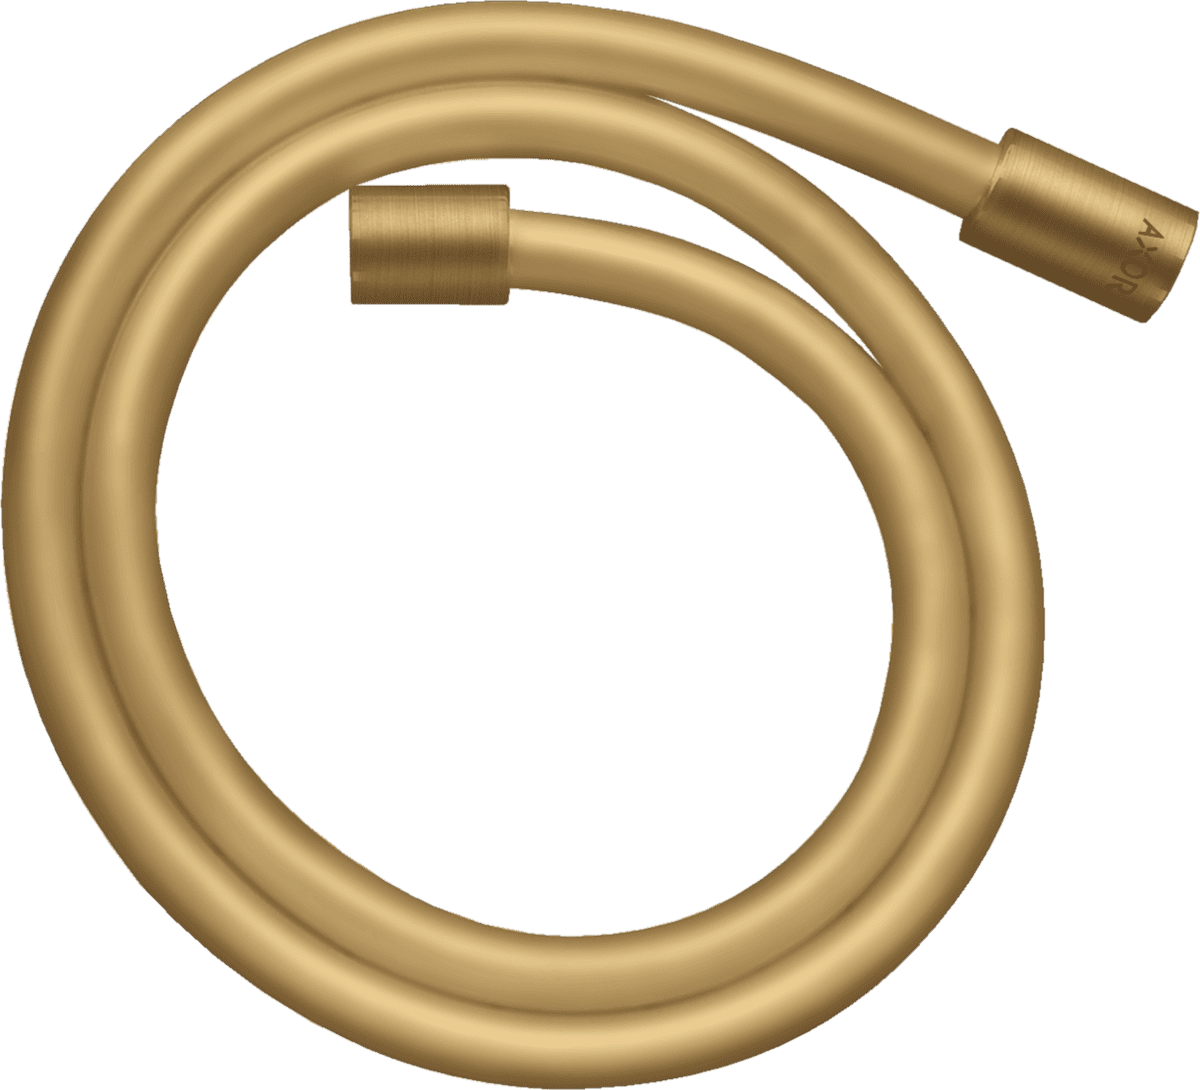 Picture of HANSGROHE AXOR Starck Metal effect shower hose 2.00 m with cylindrical nuts #28284250 - Brushed Gold Optic